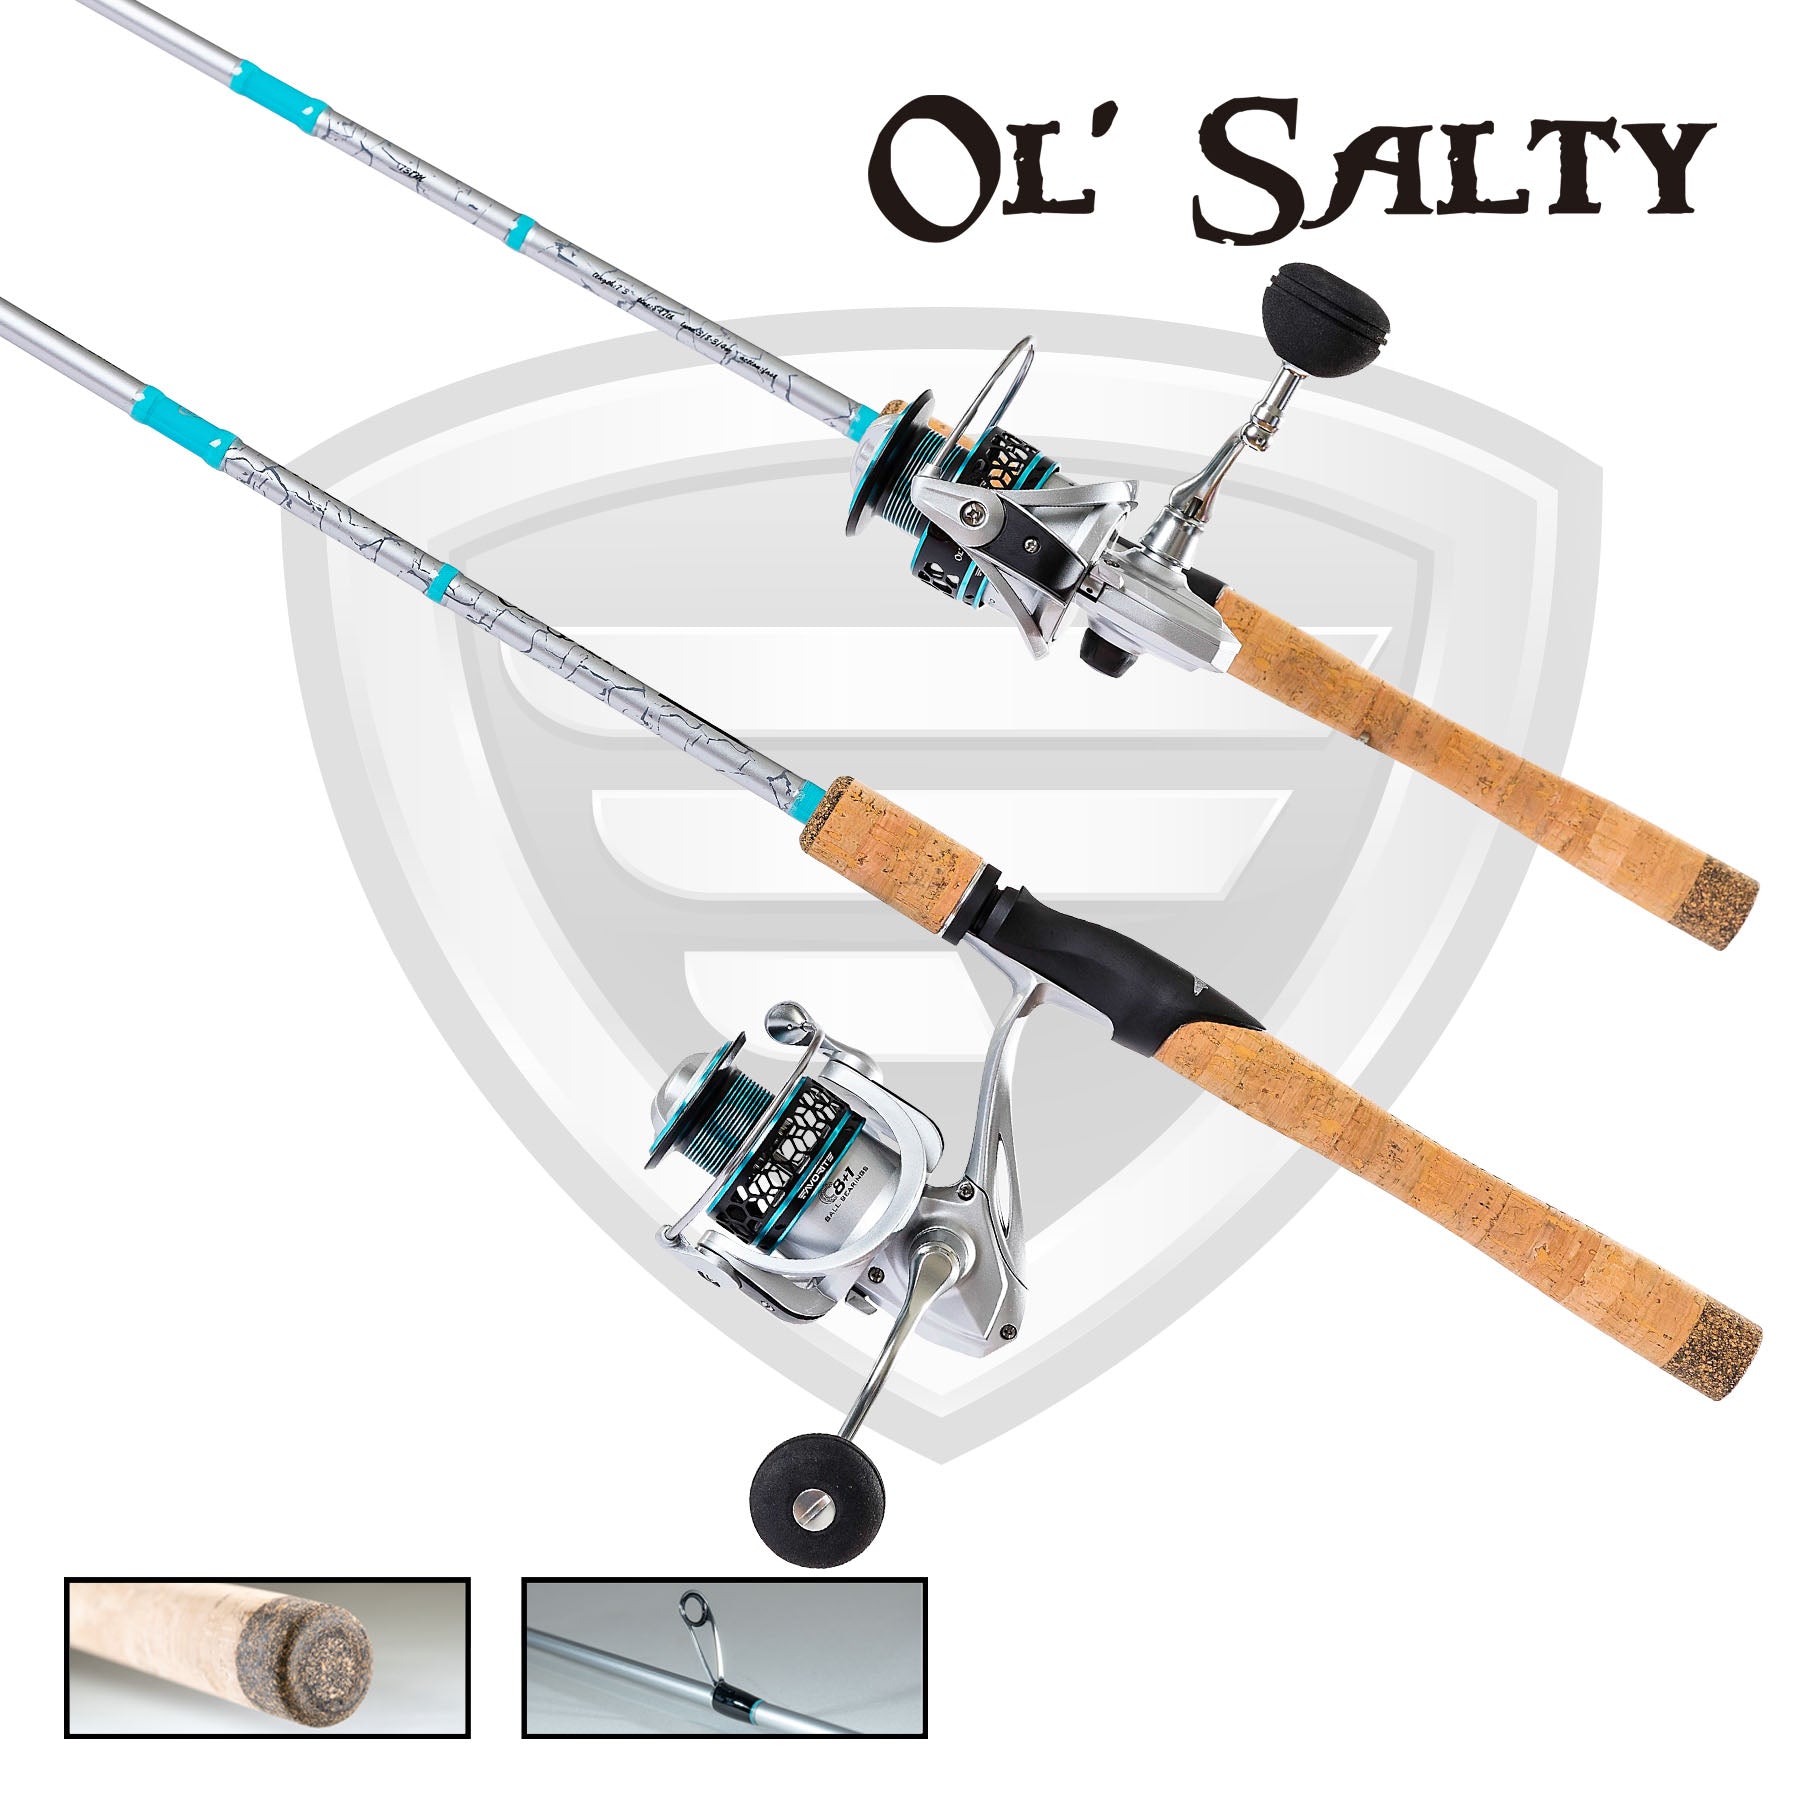 Favorite Ol' Salty Spinning Combo